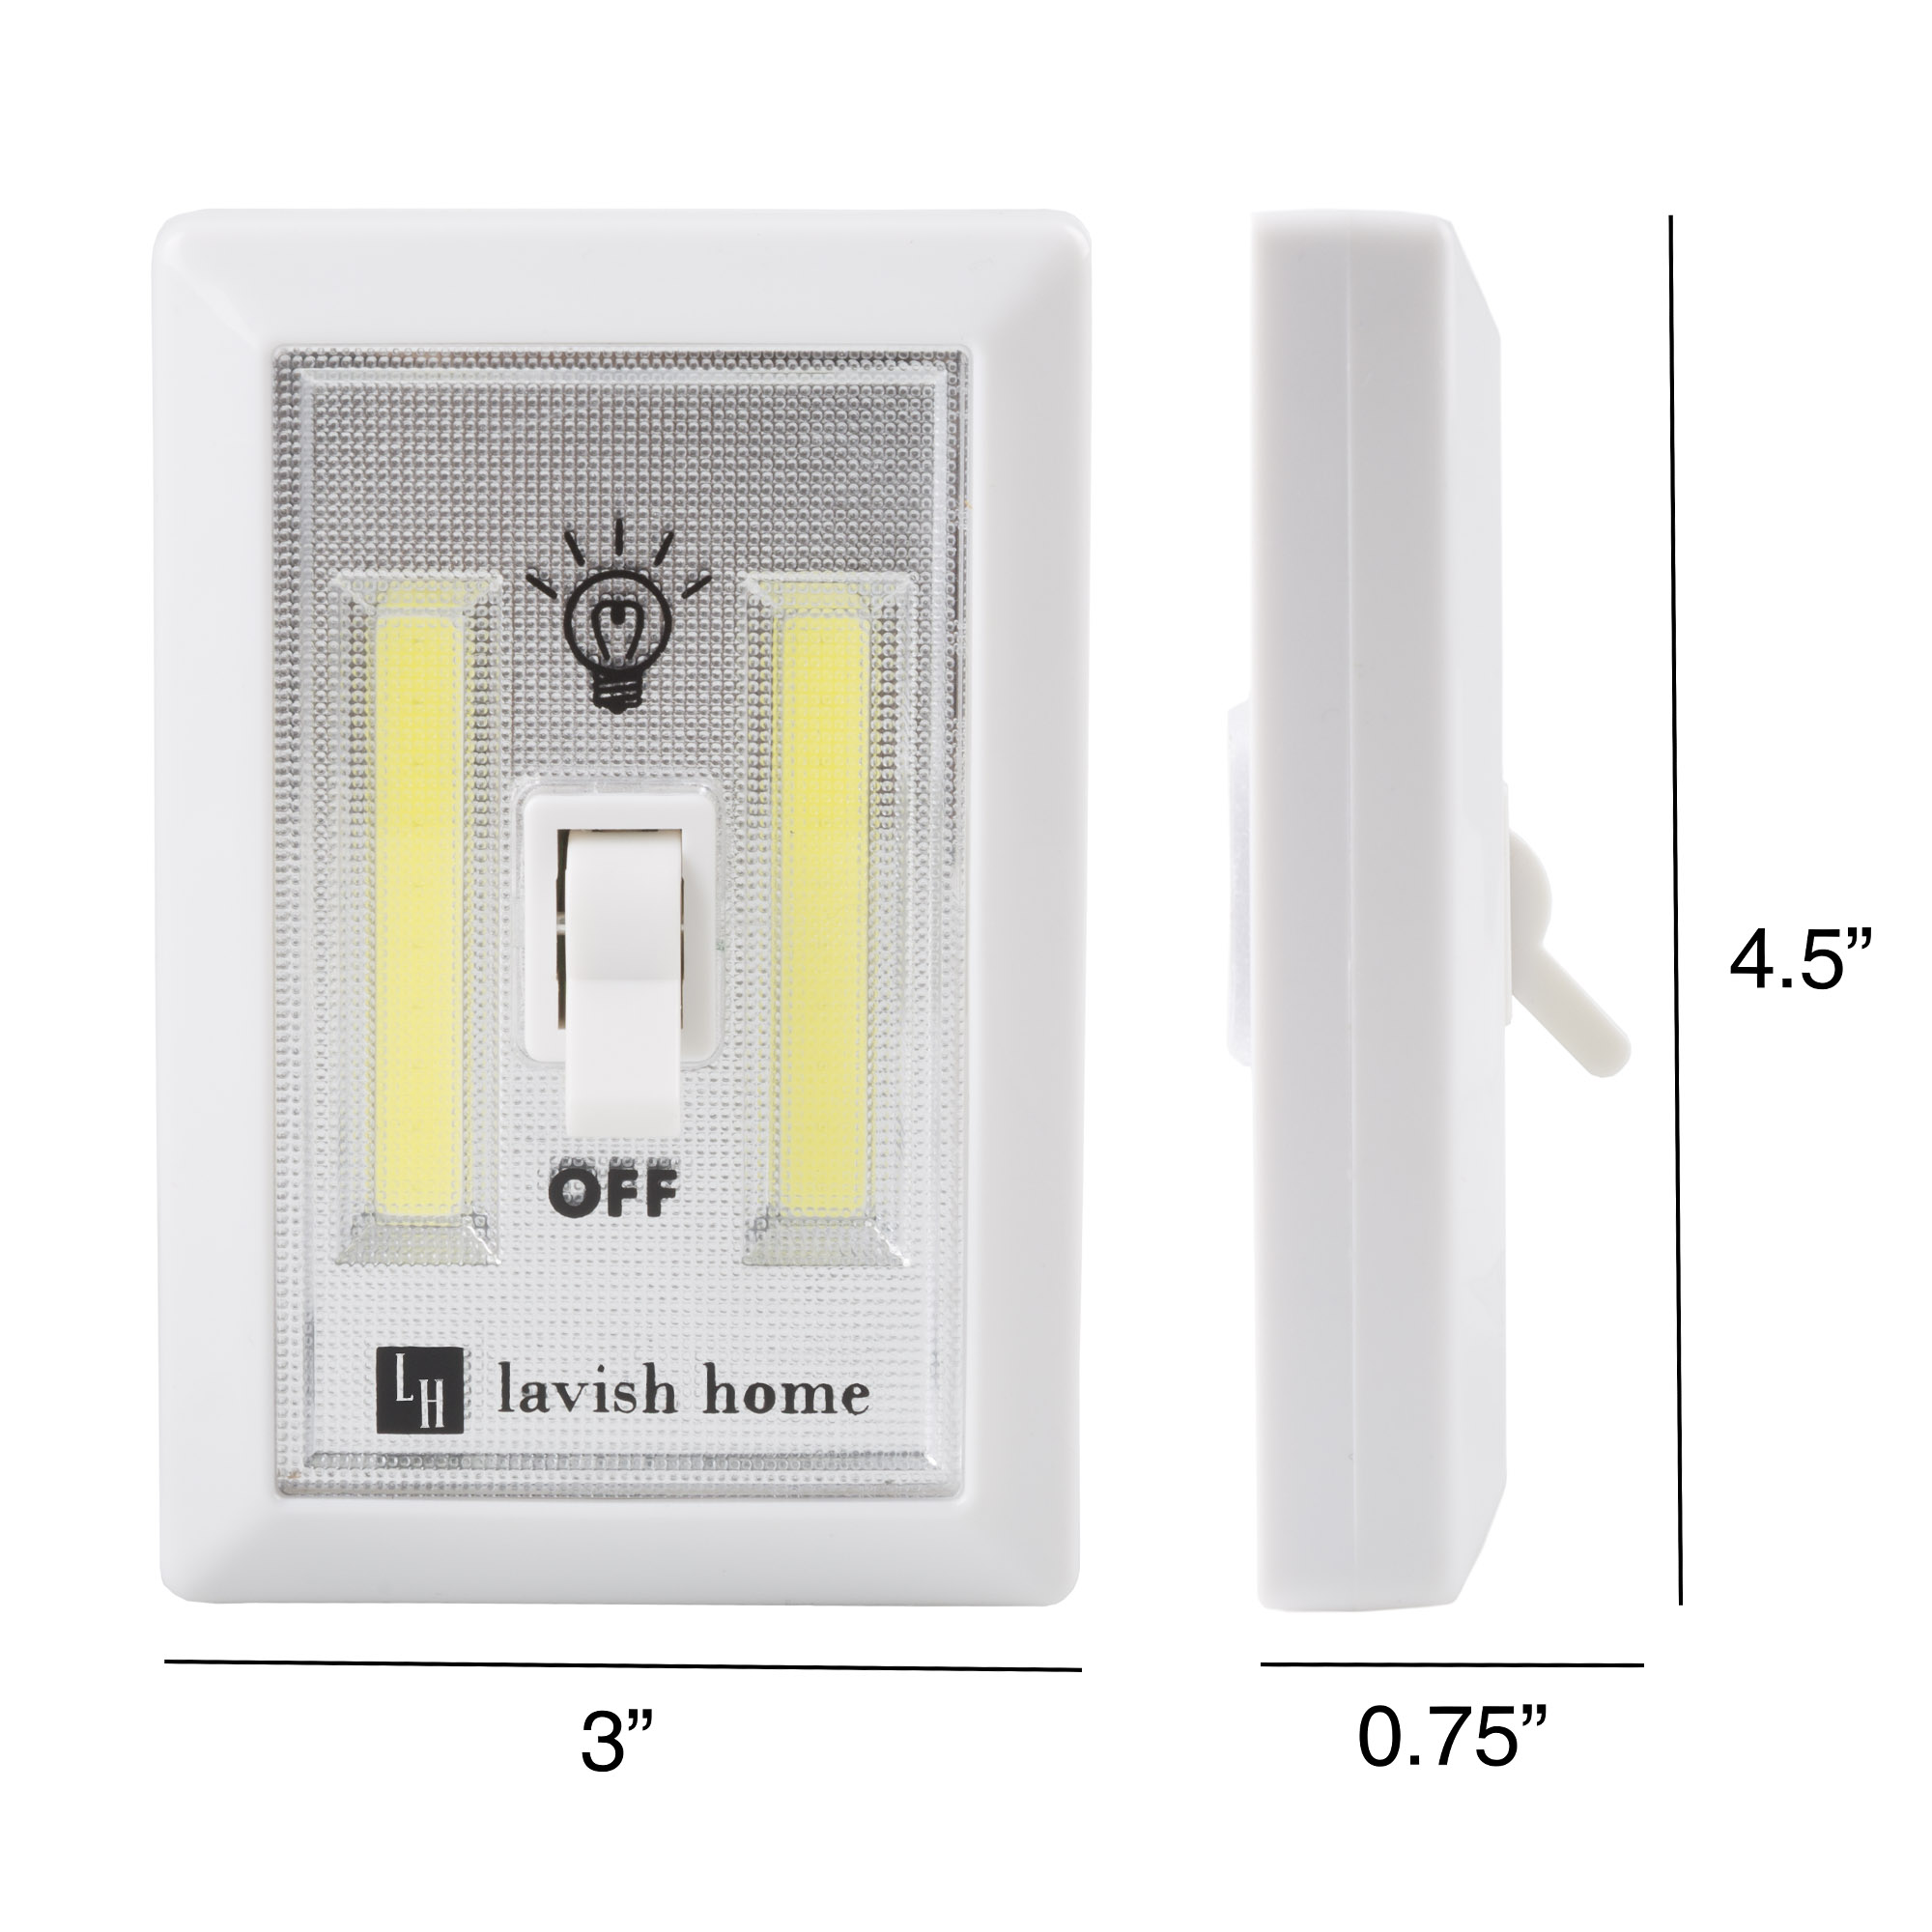 Cordless Light Switch, Battery Operated COB LED Night Light (For Closet, Under Cabinet, Shelf, Wall, Kids Room, Basement) By Lavish Home - image 3 of 6